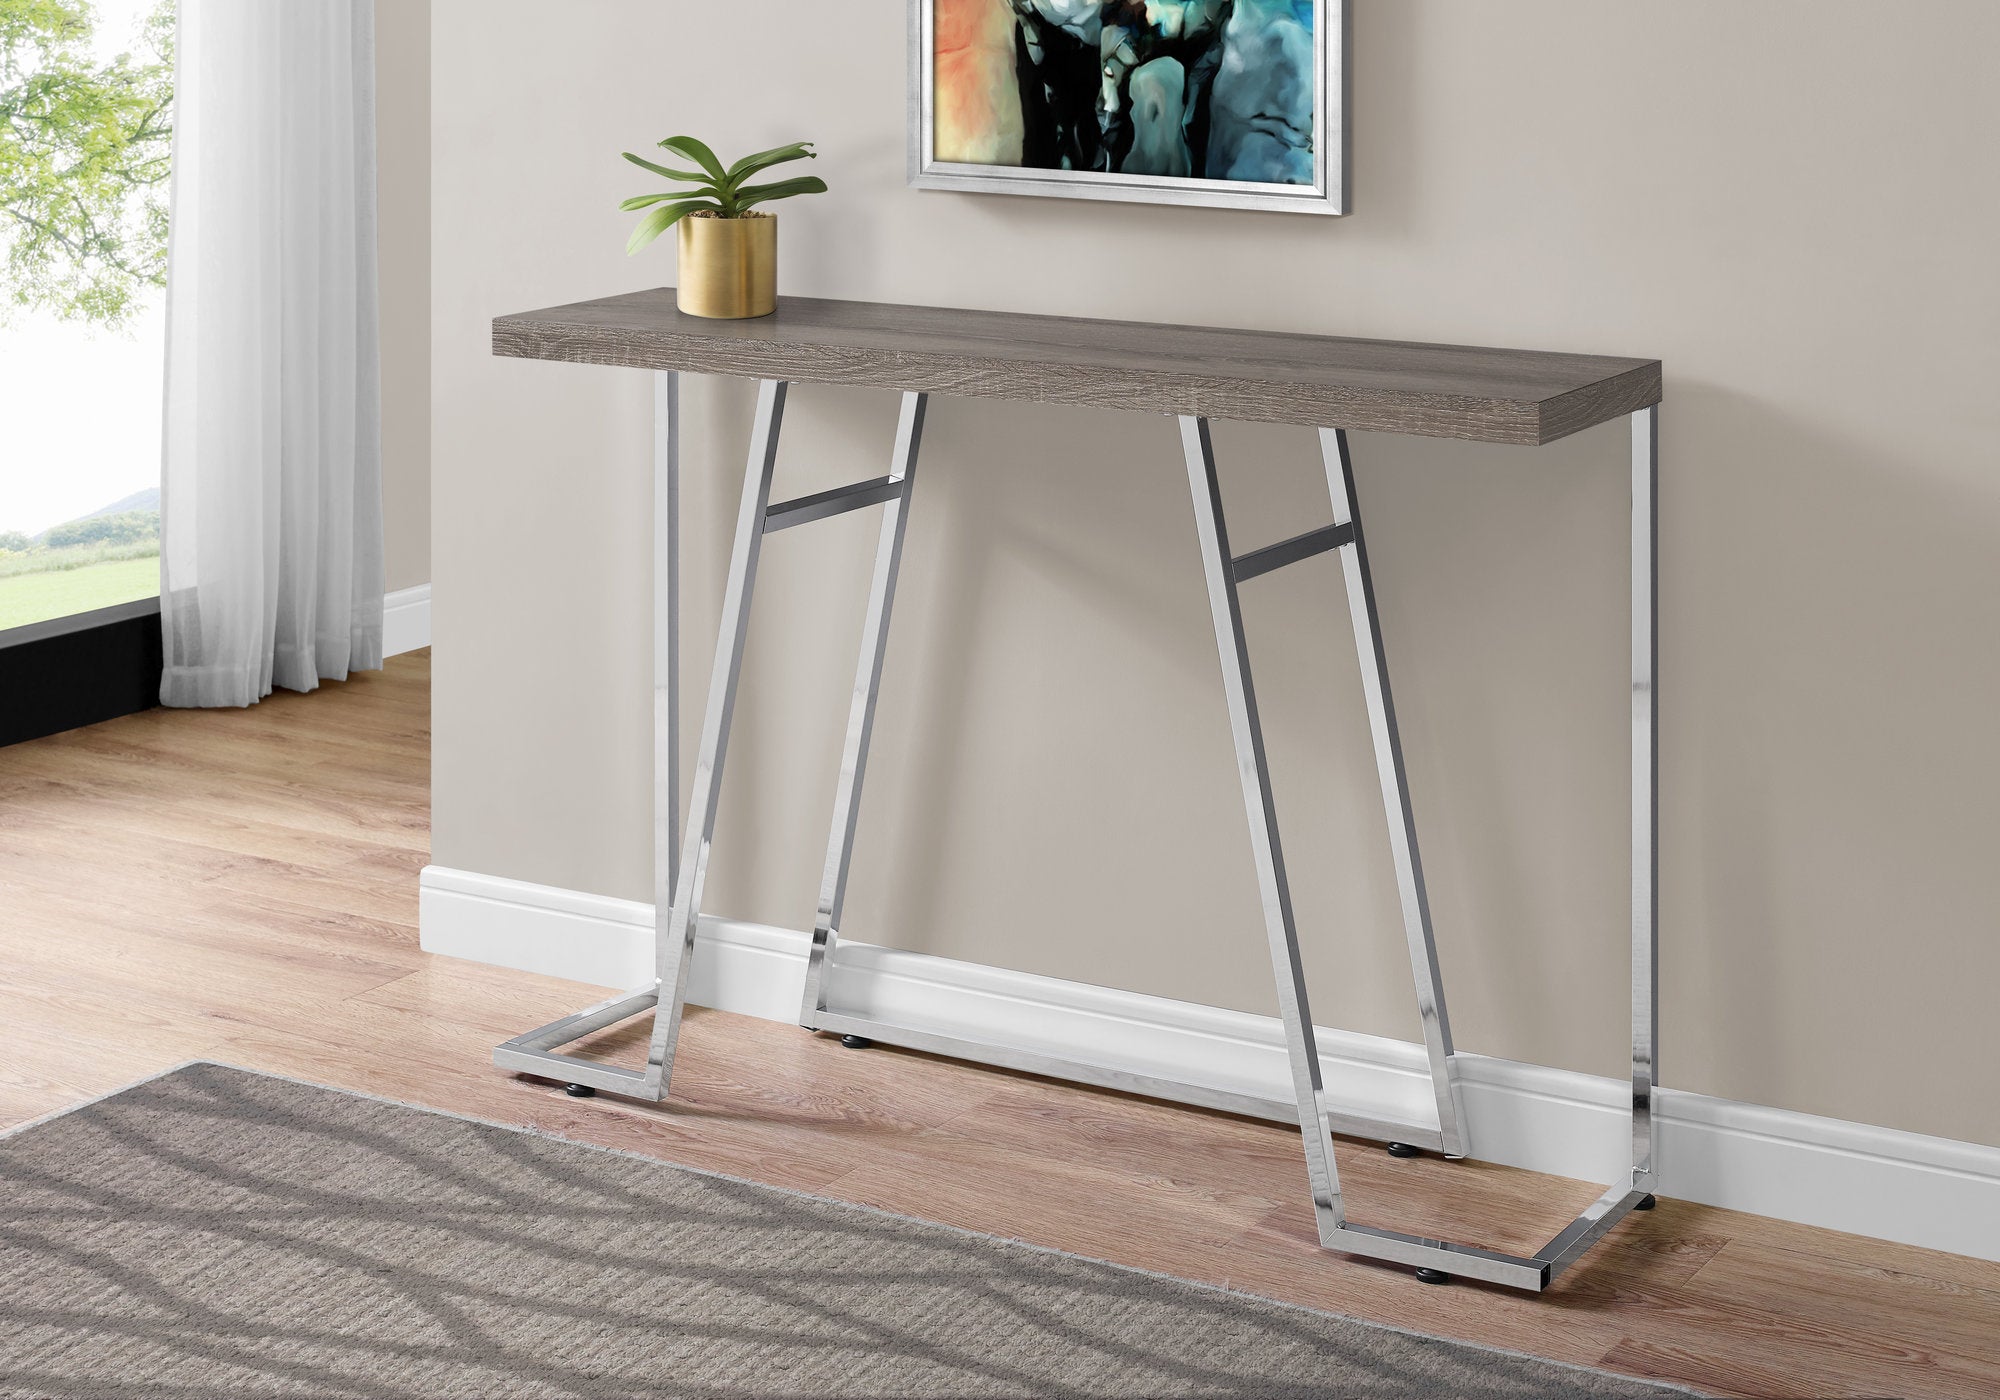 I 3169 - ACCENT TABLE - 48"L / DARK TAUPE / CHROME METAL BY MONARCH SPECIALTIES INC